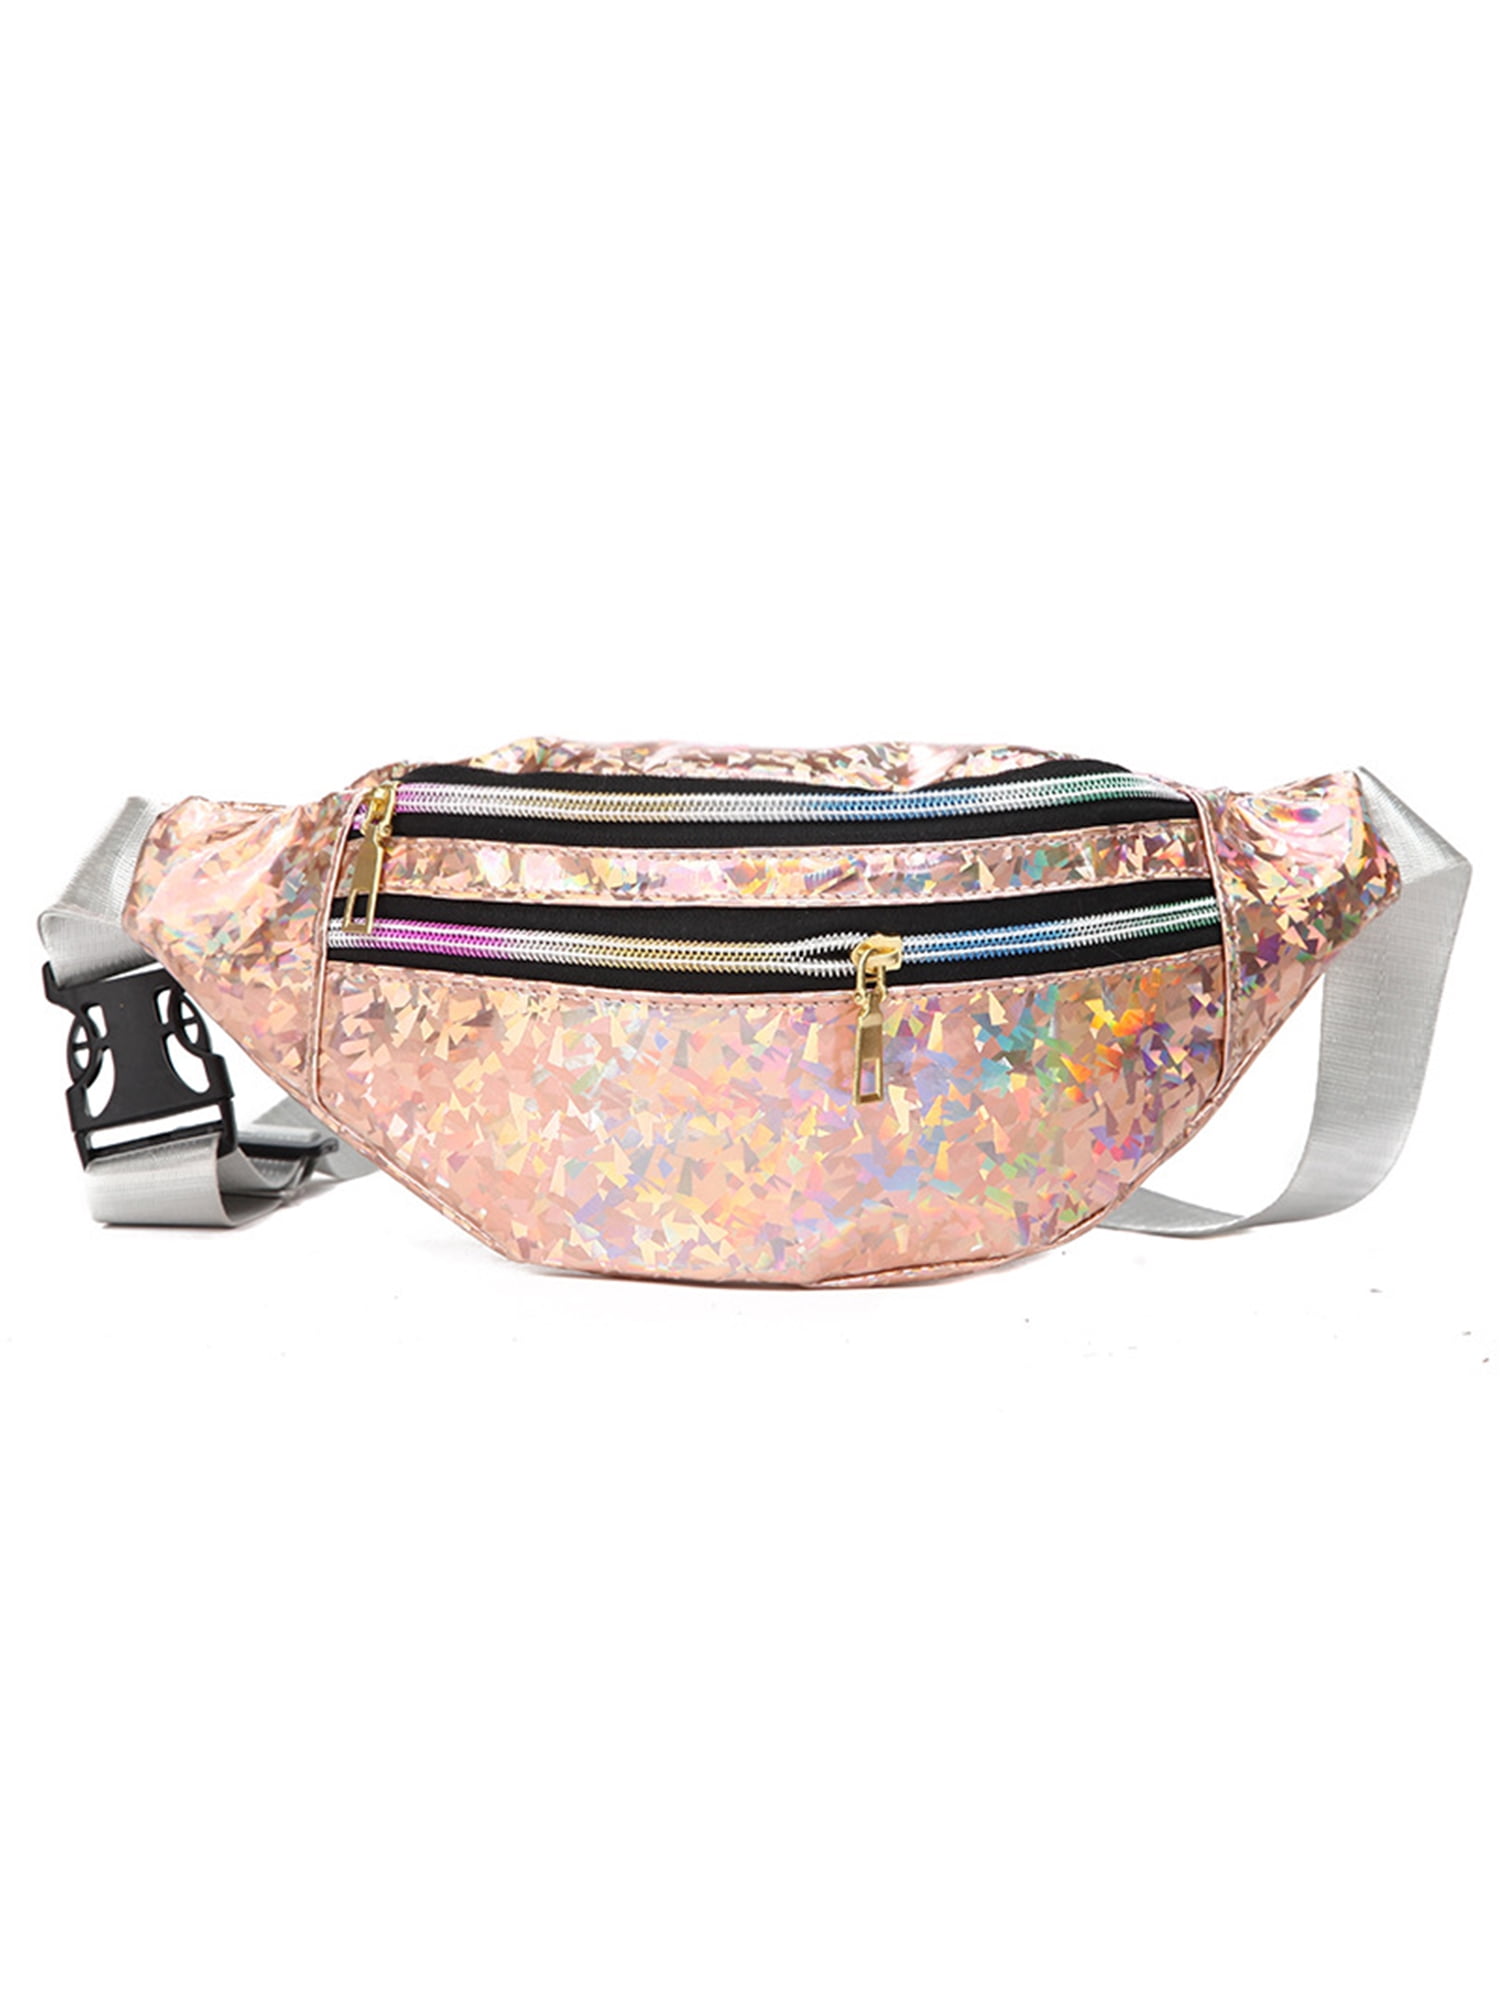 Mostdary Checkered Pack Waist Bag PU Leather Pouch Belt Bags